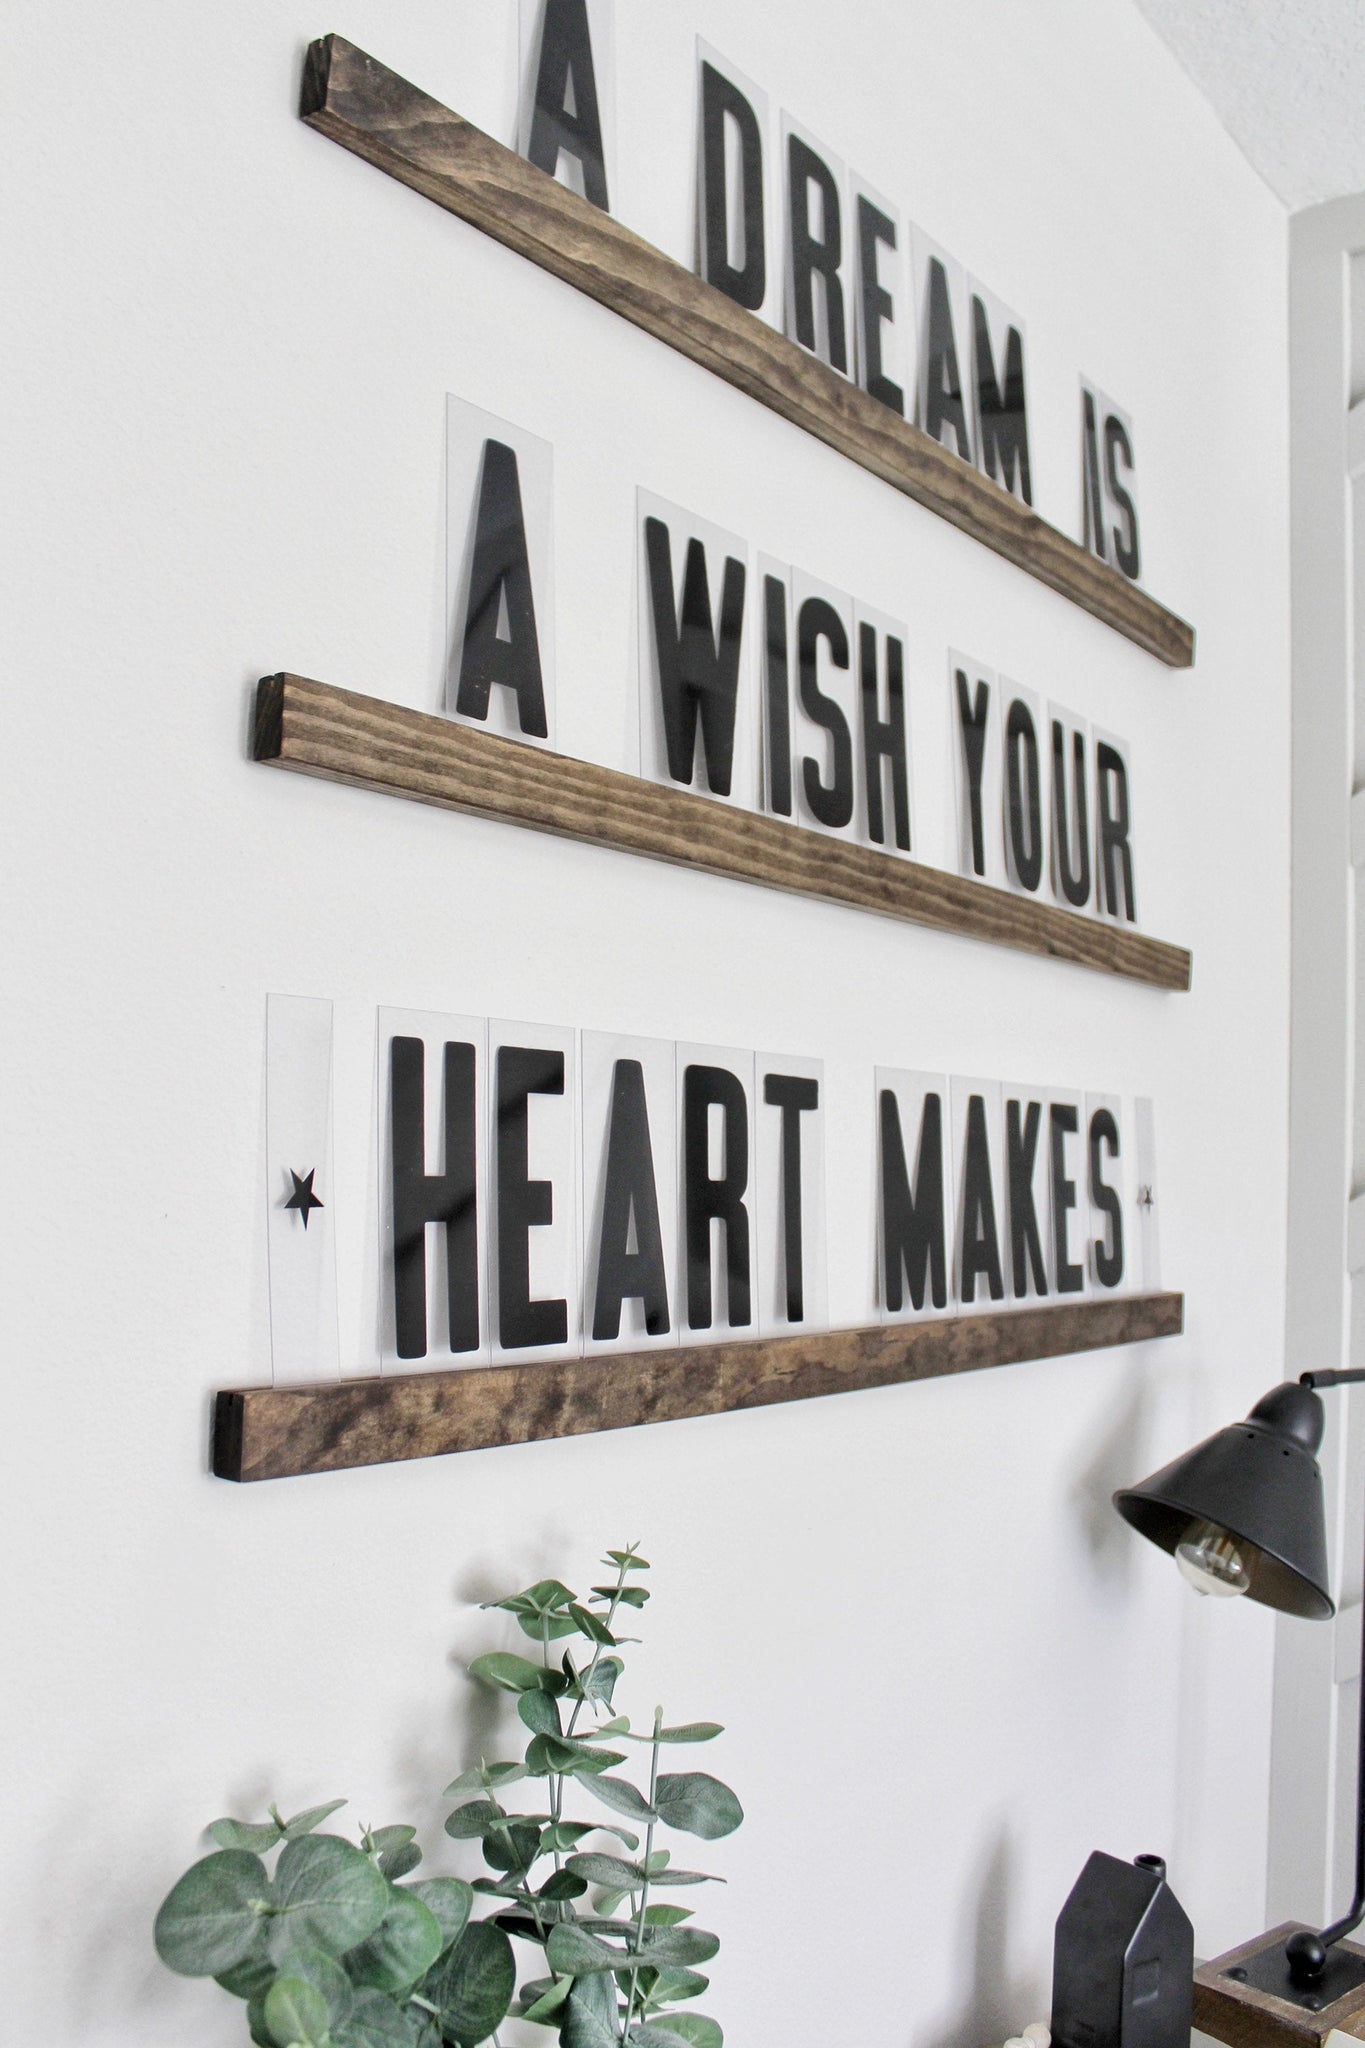 Decorative Letters For Shelf